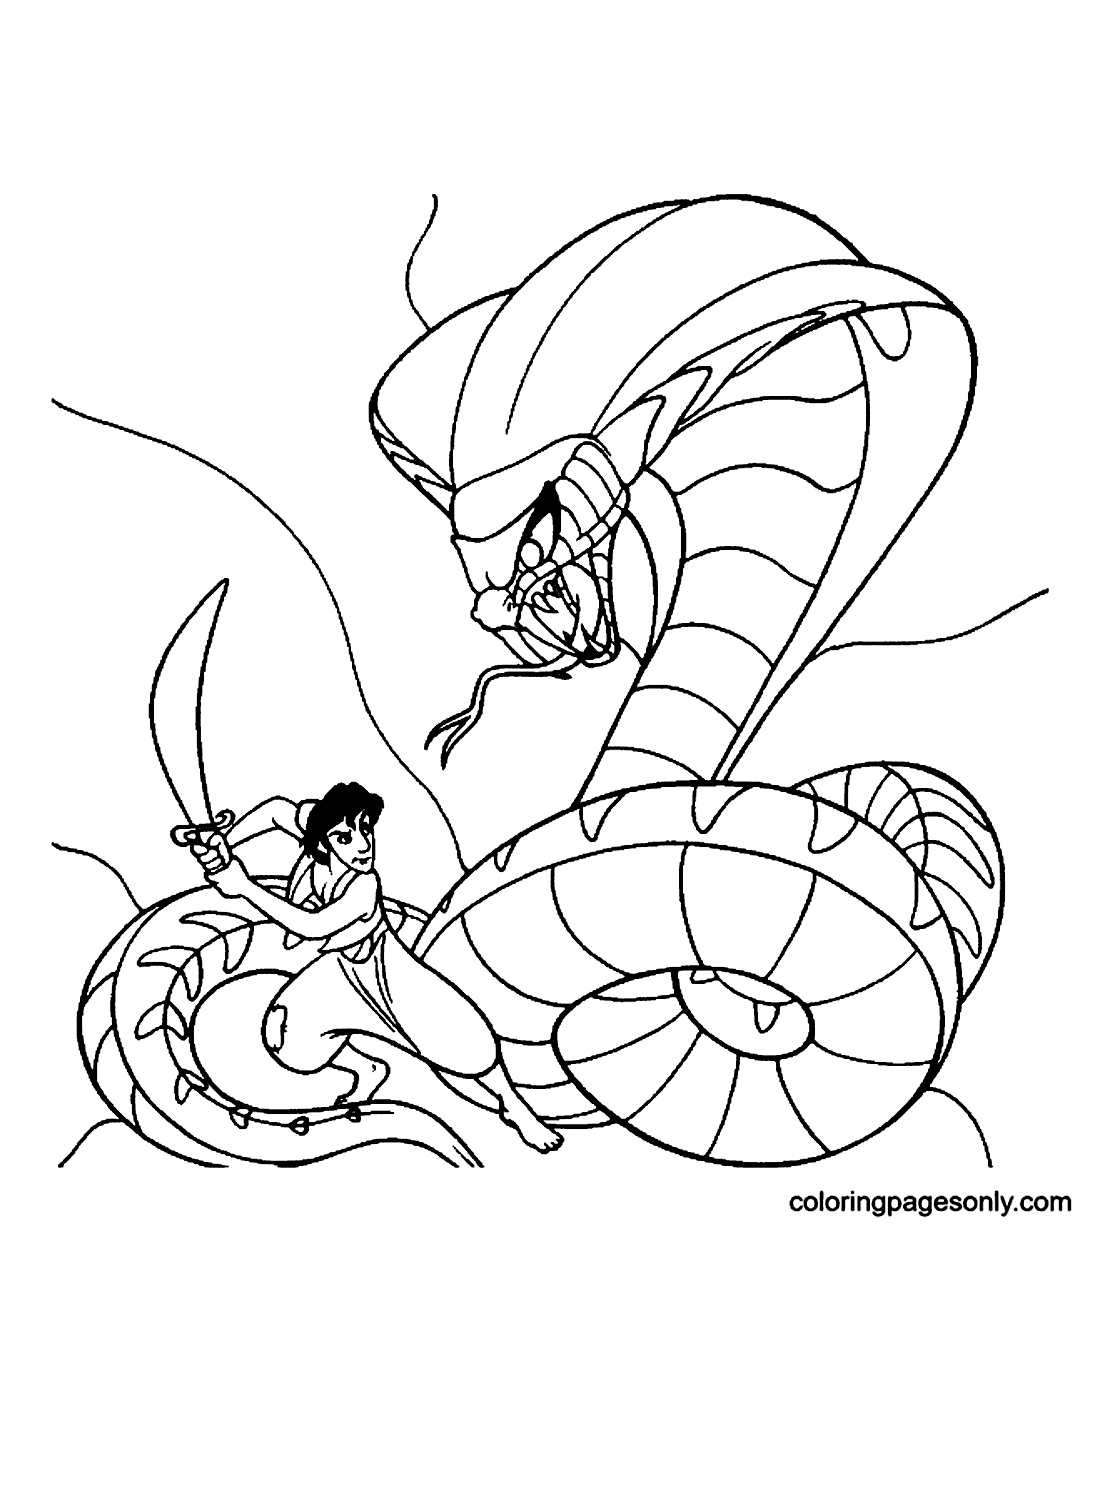 Aladin fighting Jafar the snake Coloring Pages